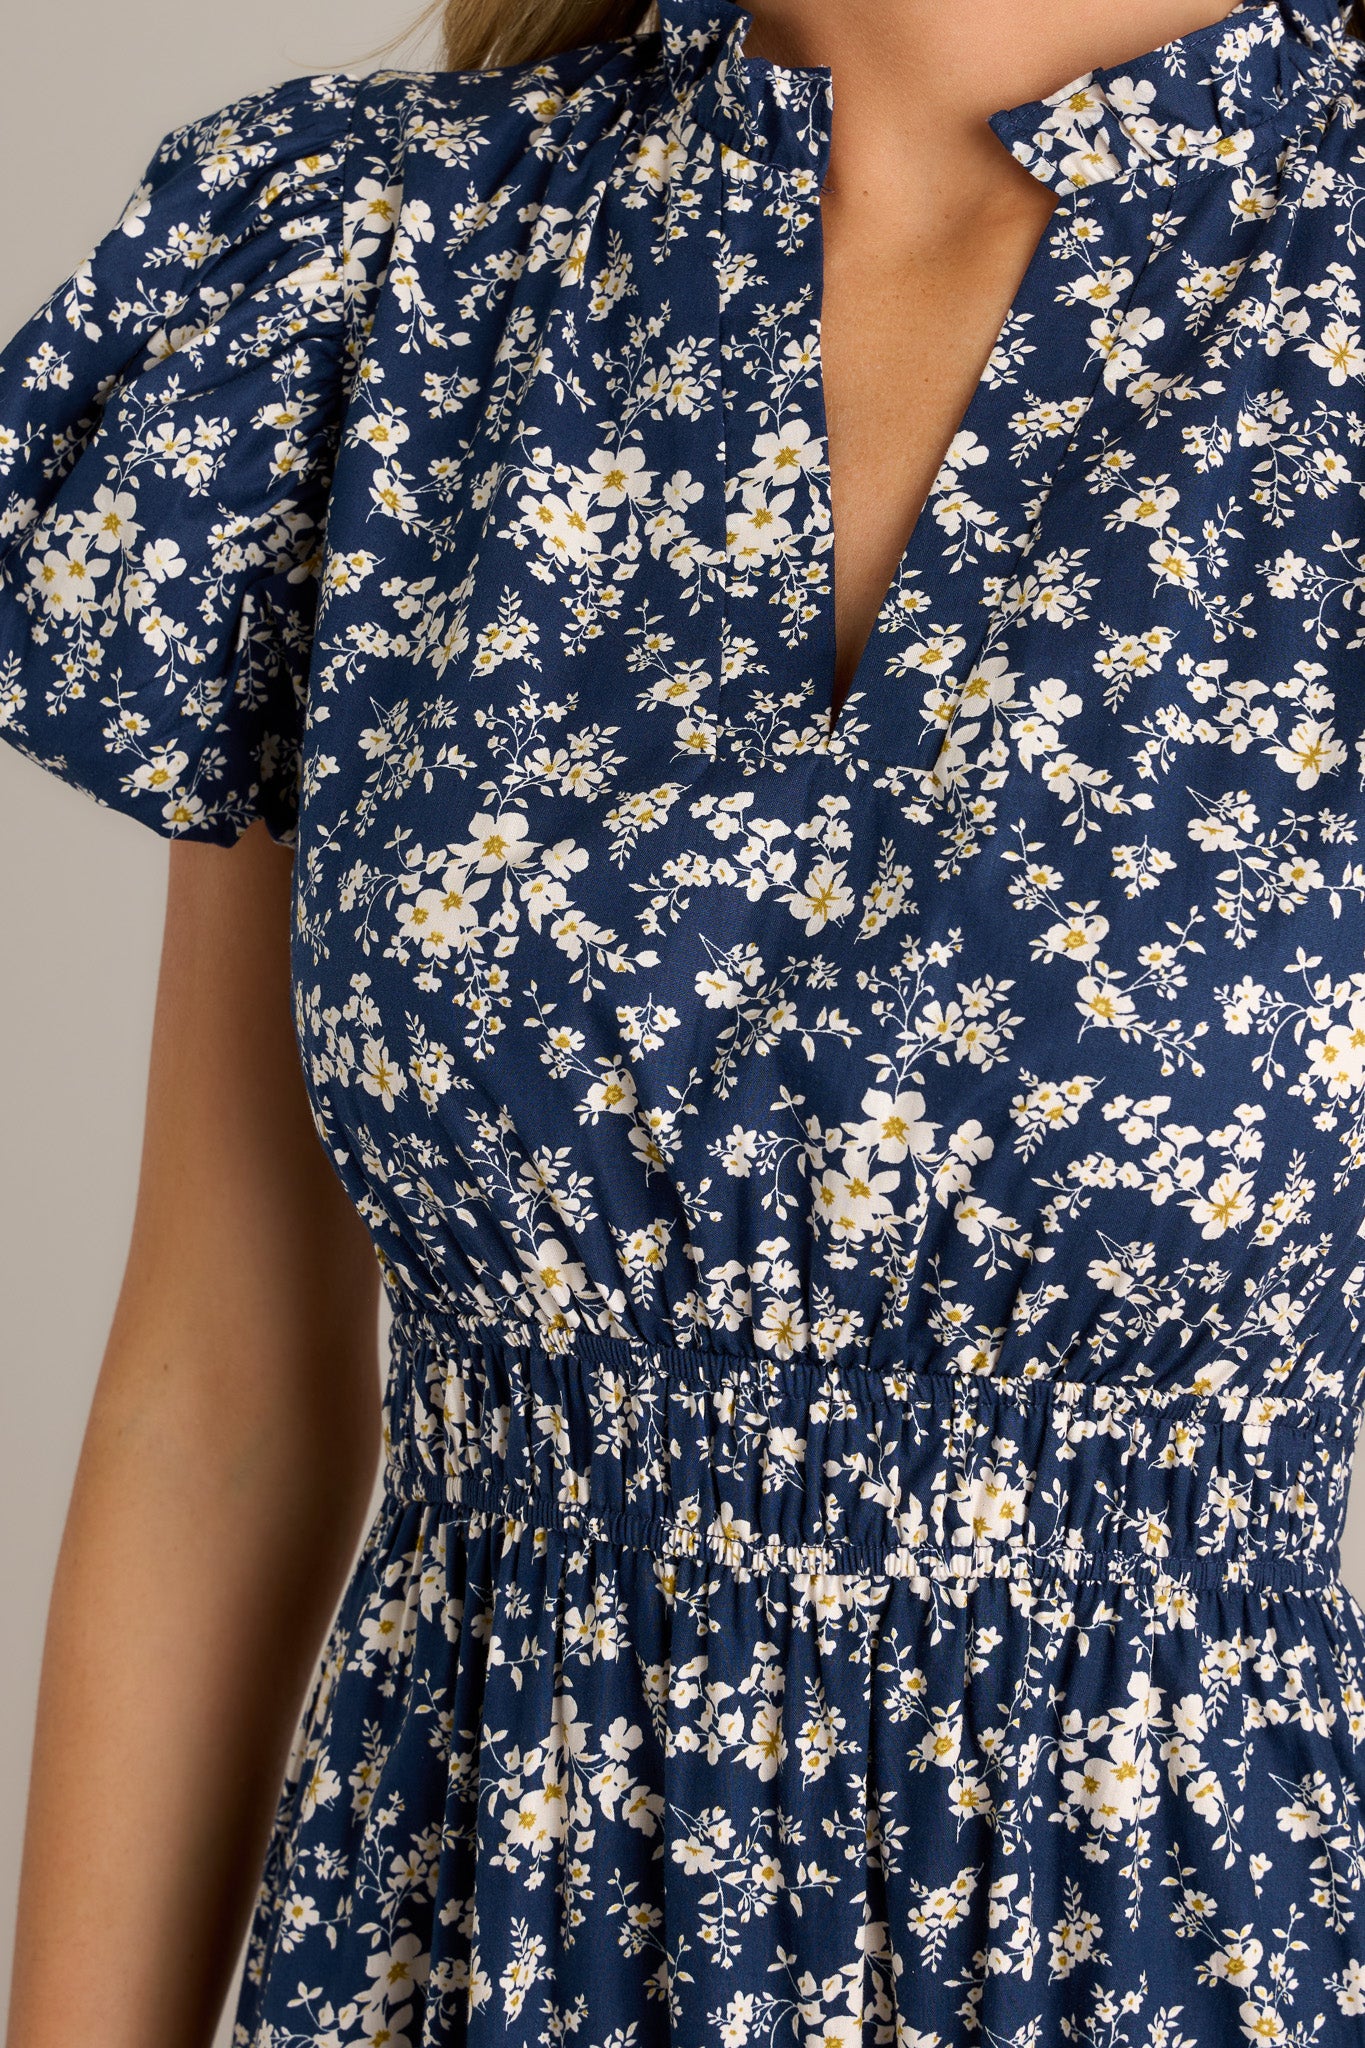 Close-up of the navy floral dress showing the v-neckline, ruffle collar, and floral pattern.